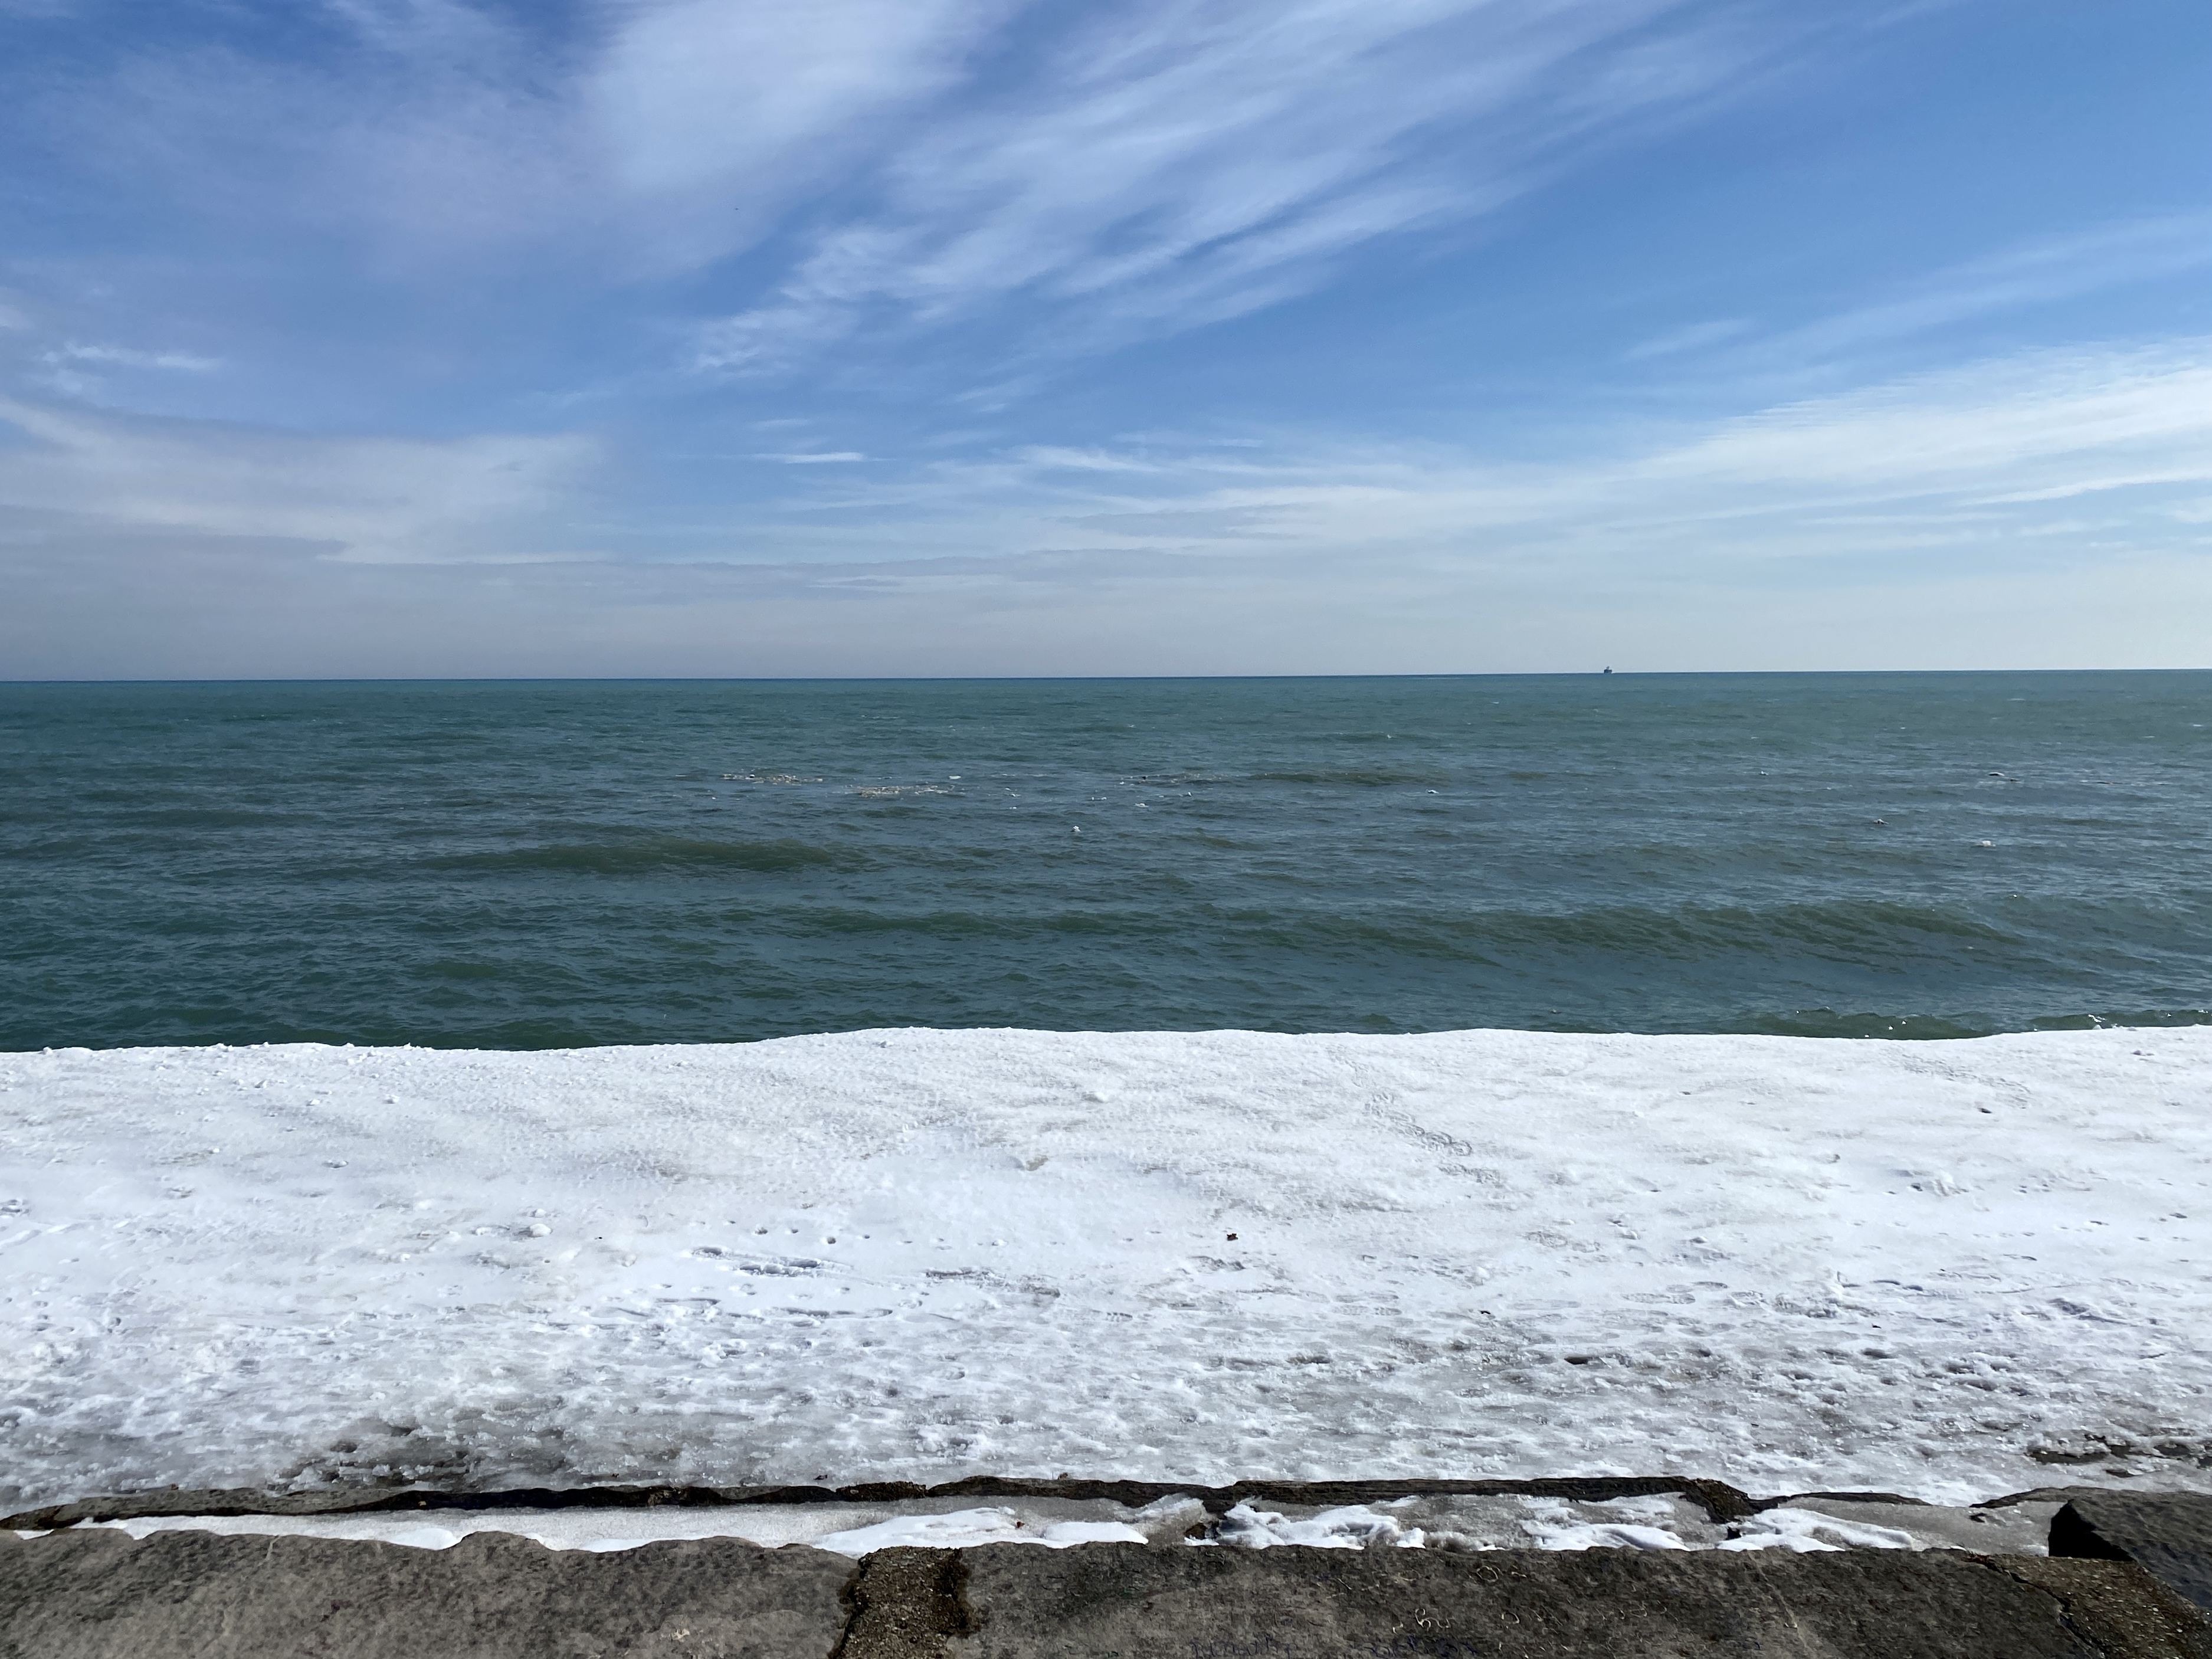 Horizon of large Lake Michigan with clear blue sky overhead, turquoise-shaded water and a shelf of snow in the foreground